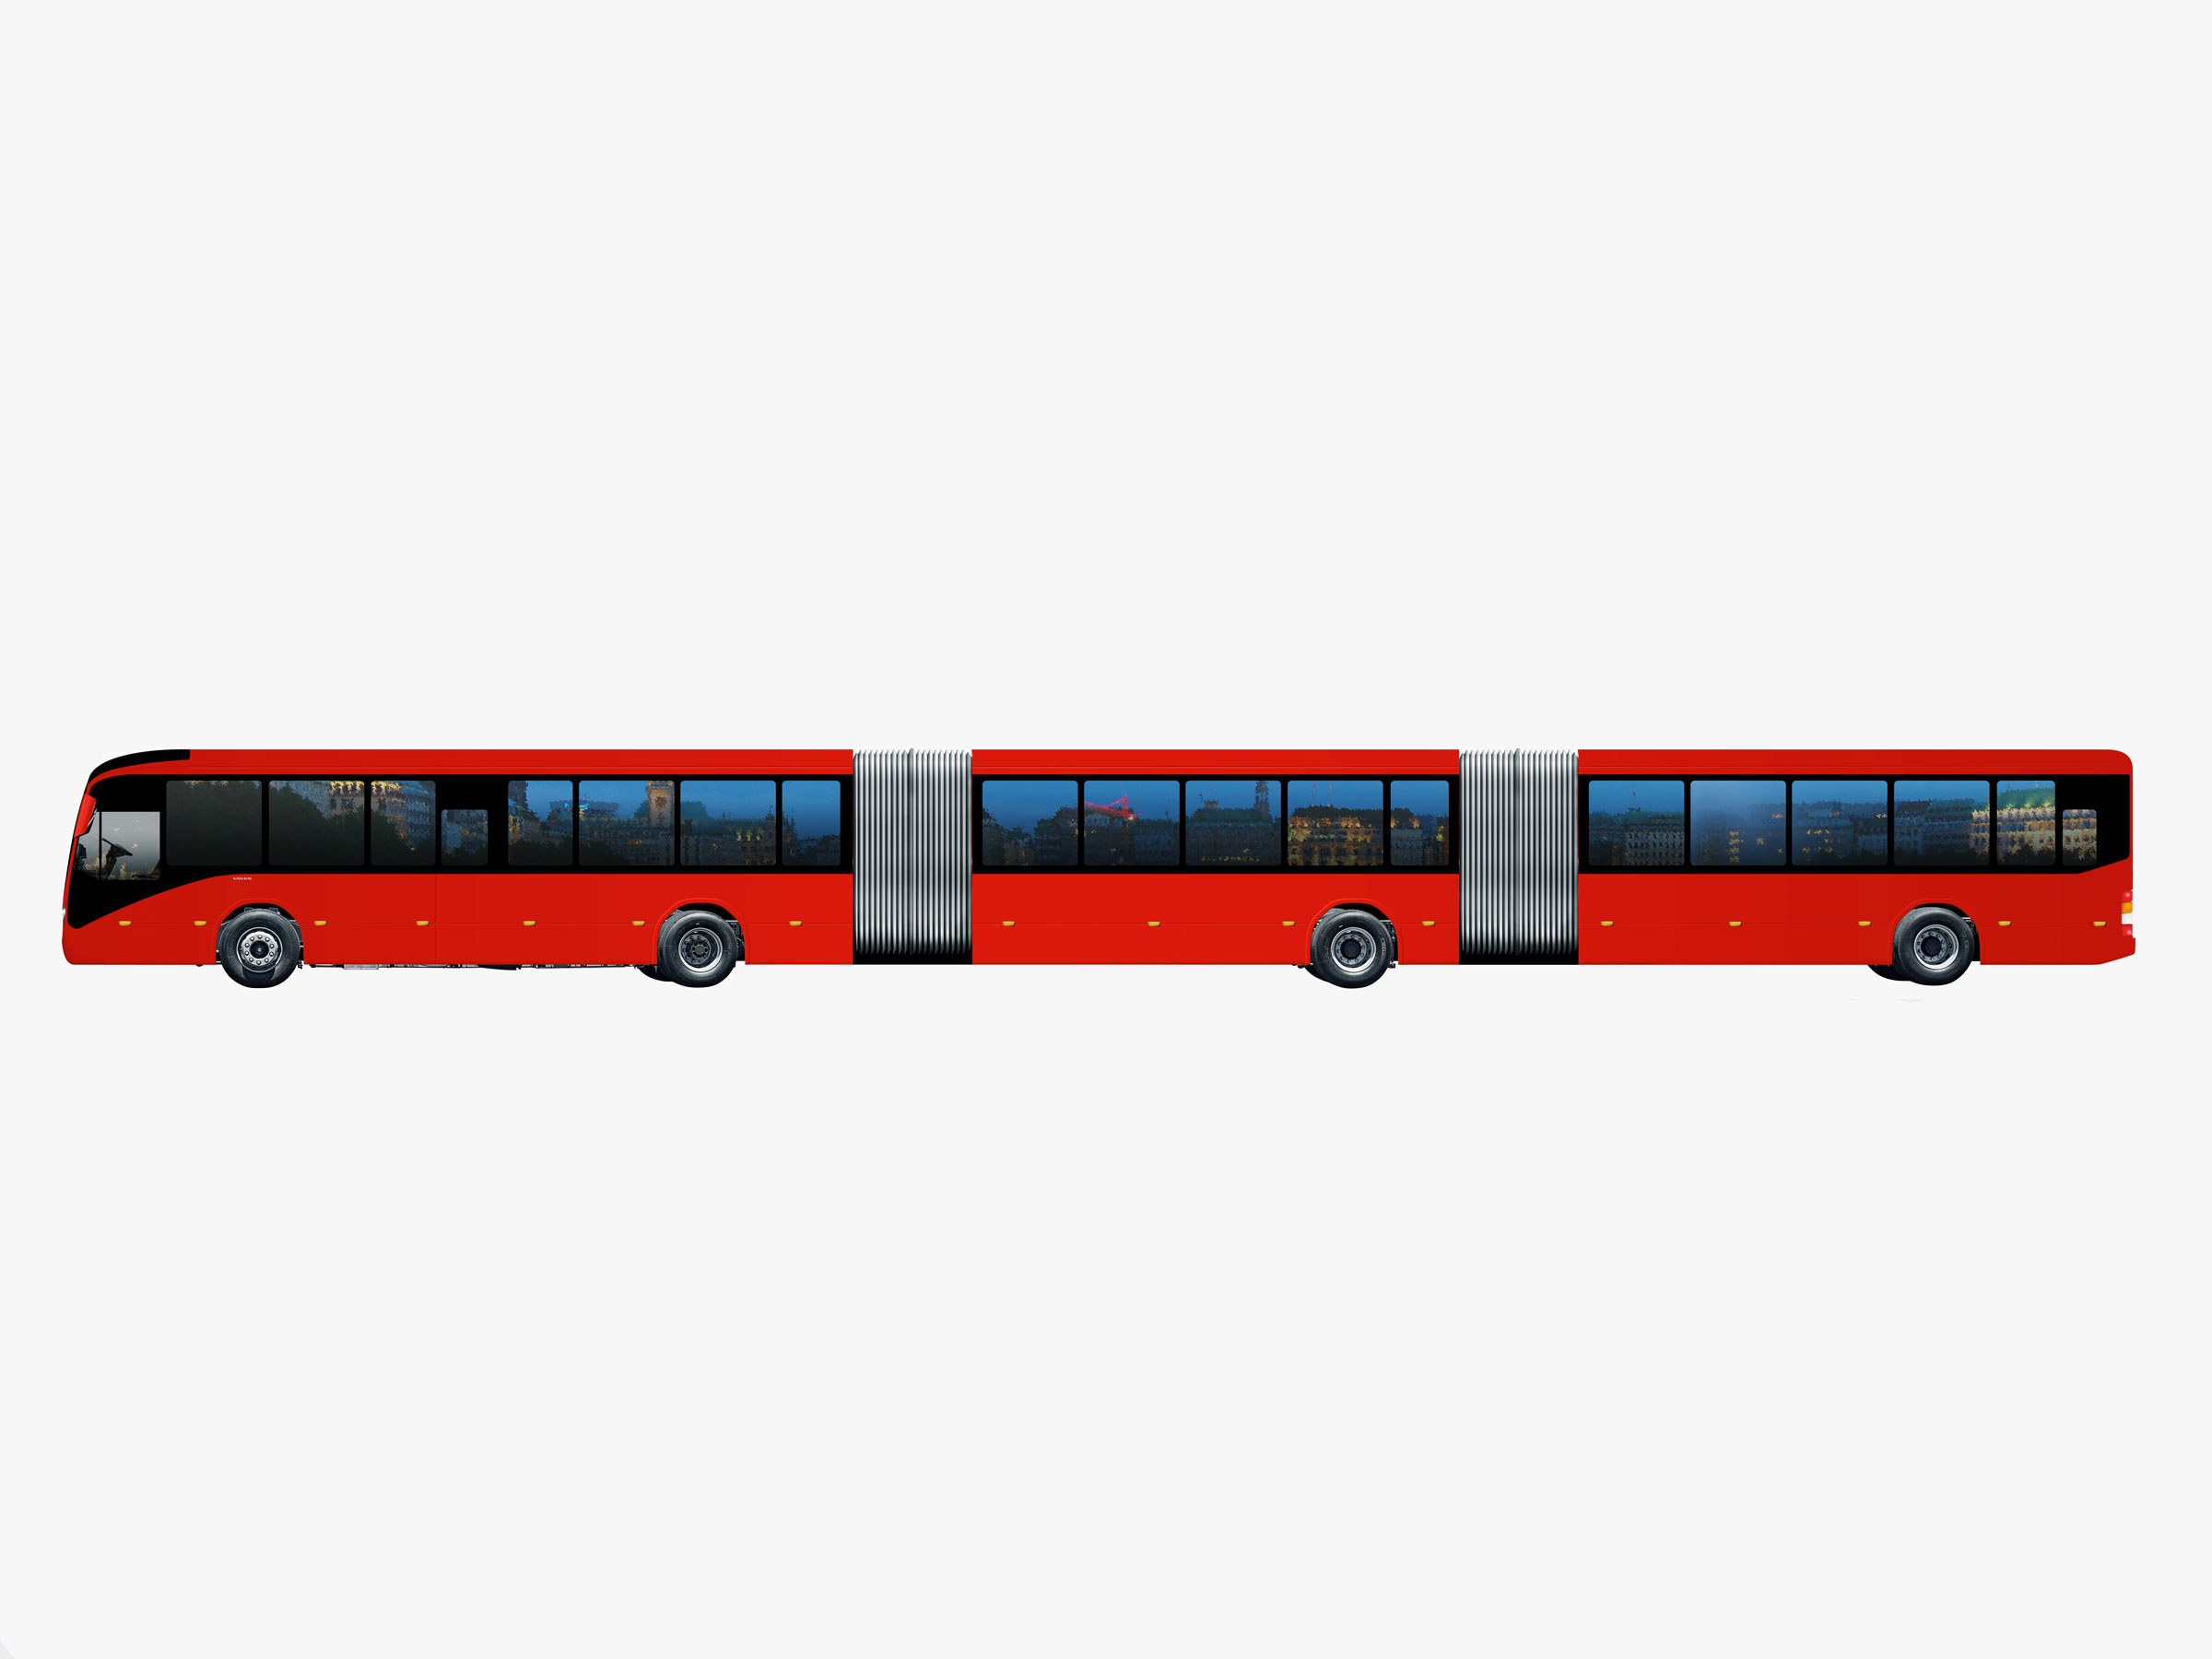 Volvo's Gran Artic 300 Bus Is 98 Feet Long and Very Brazilian | WIRED